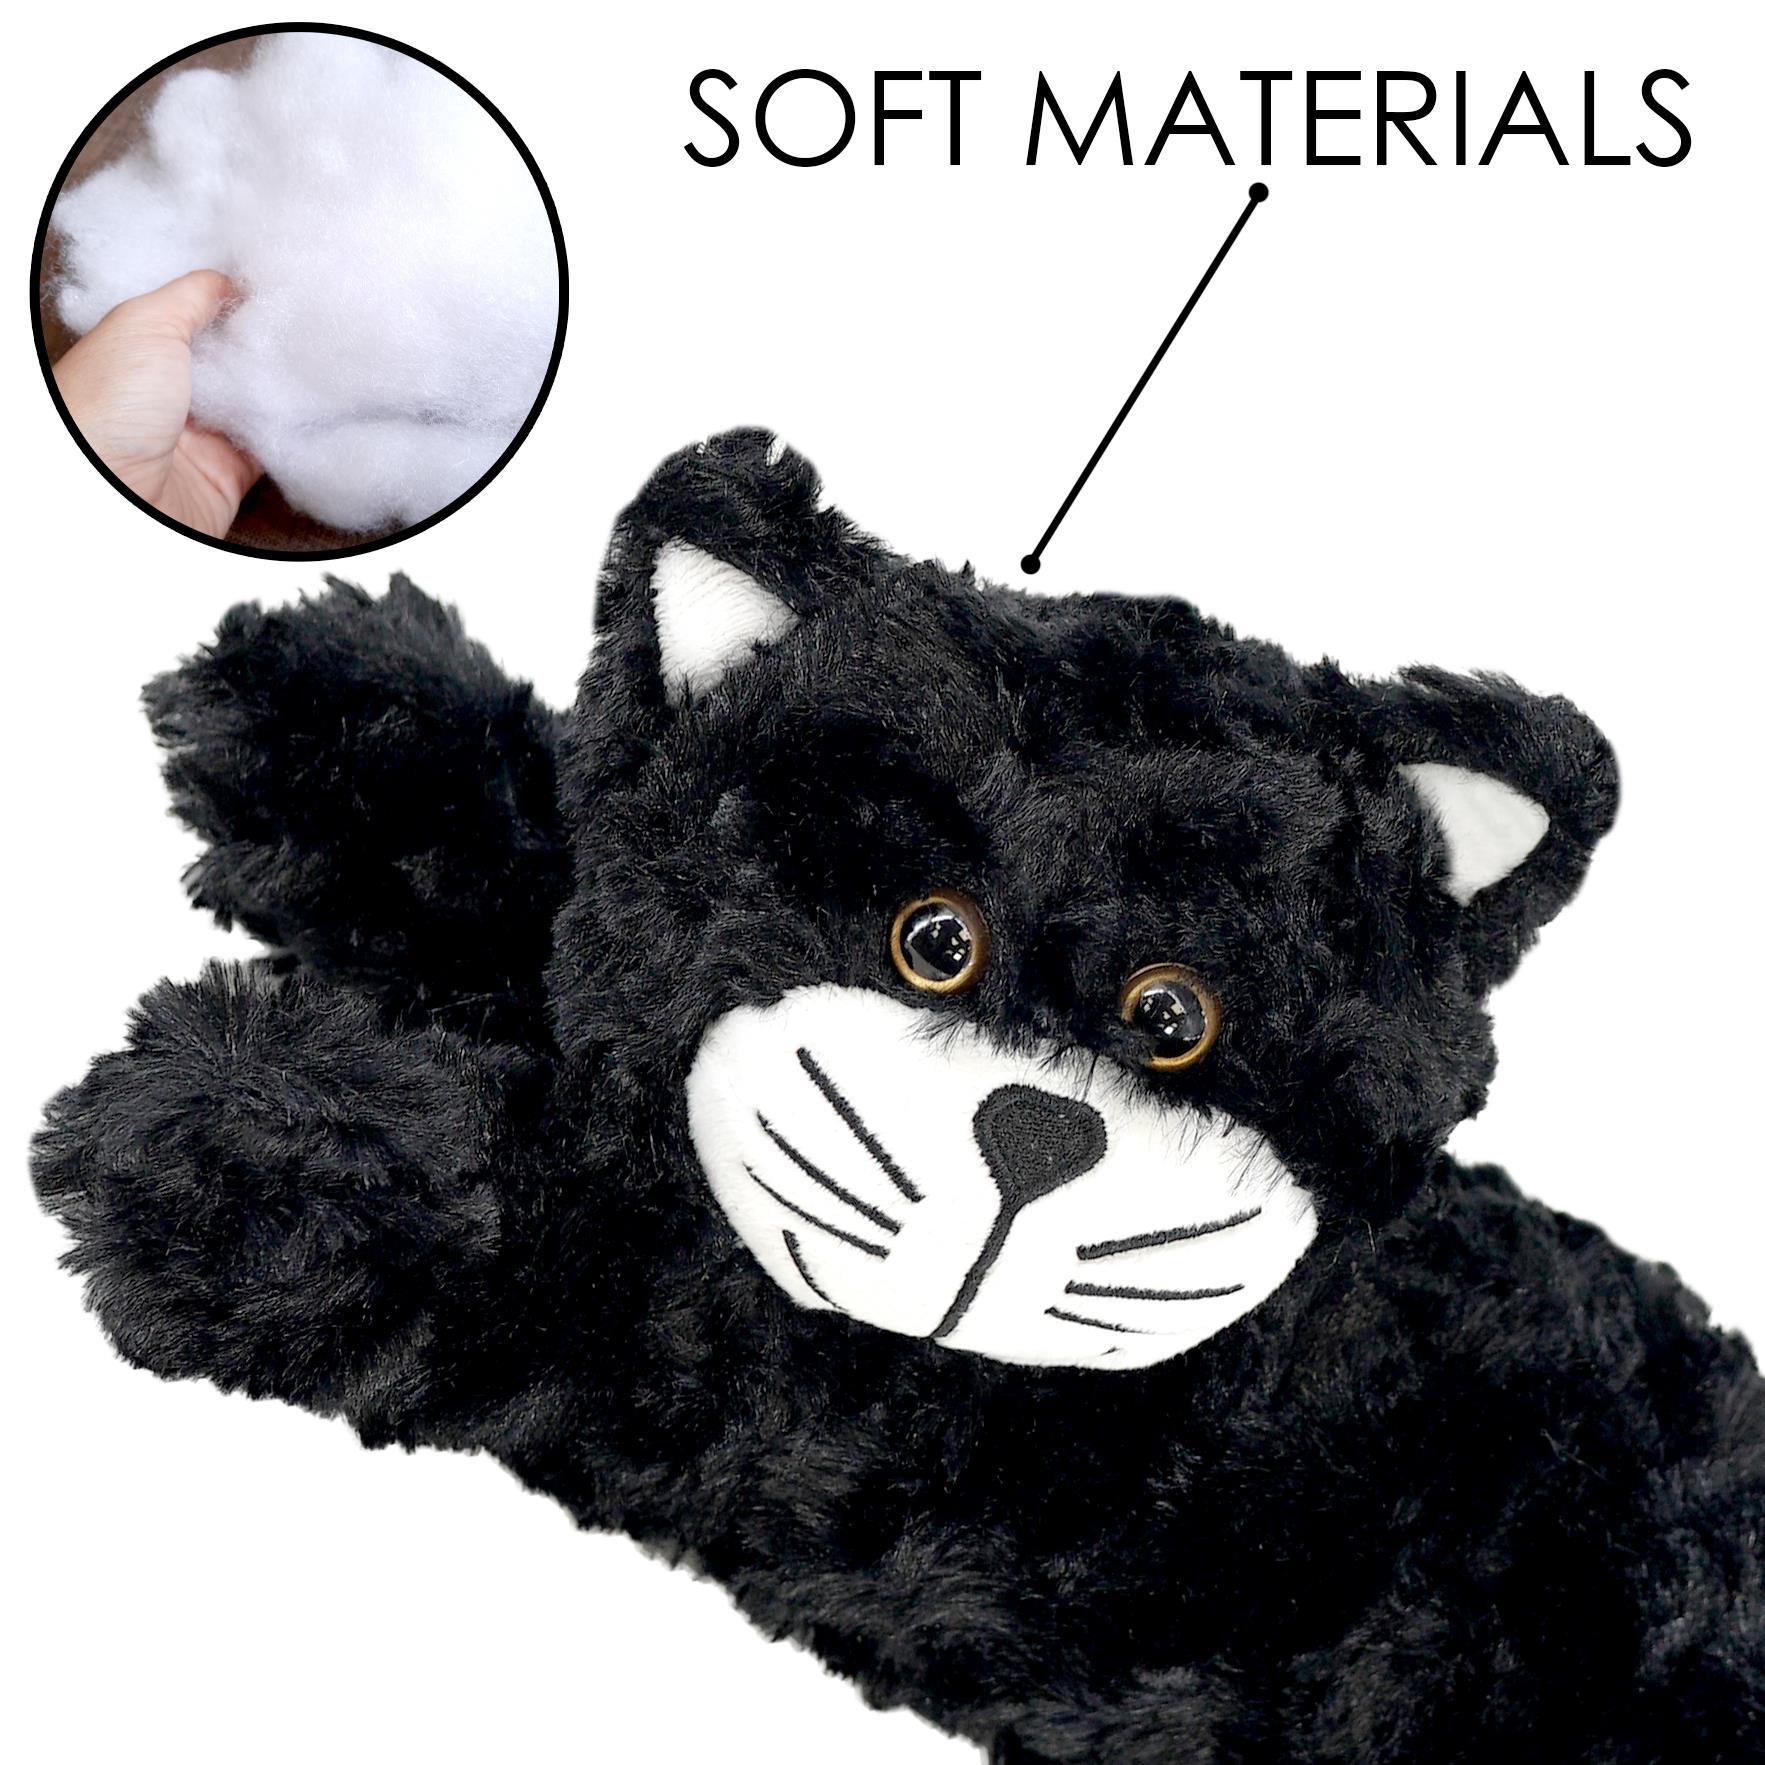 Novelty Black Cat Micro-Fleece Excluder by Geezy - The Magic Toy Shop